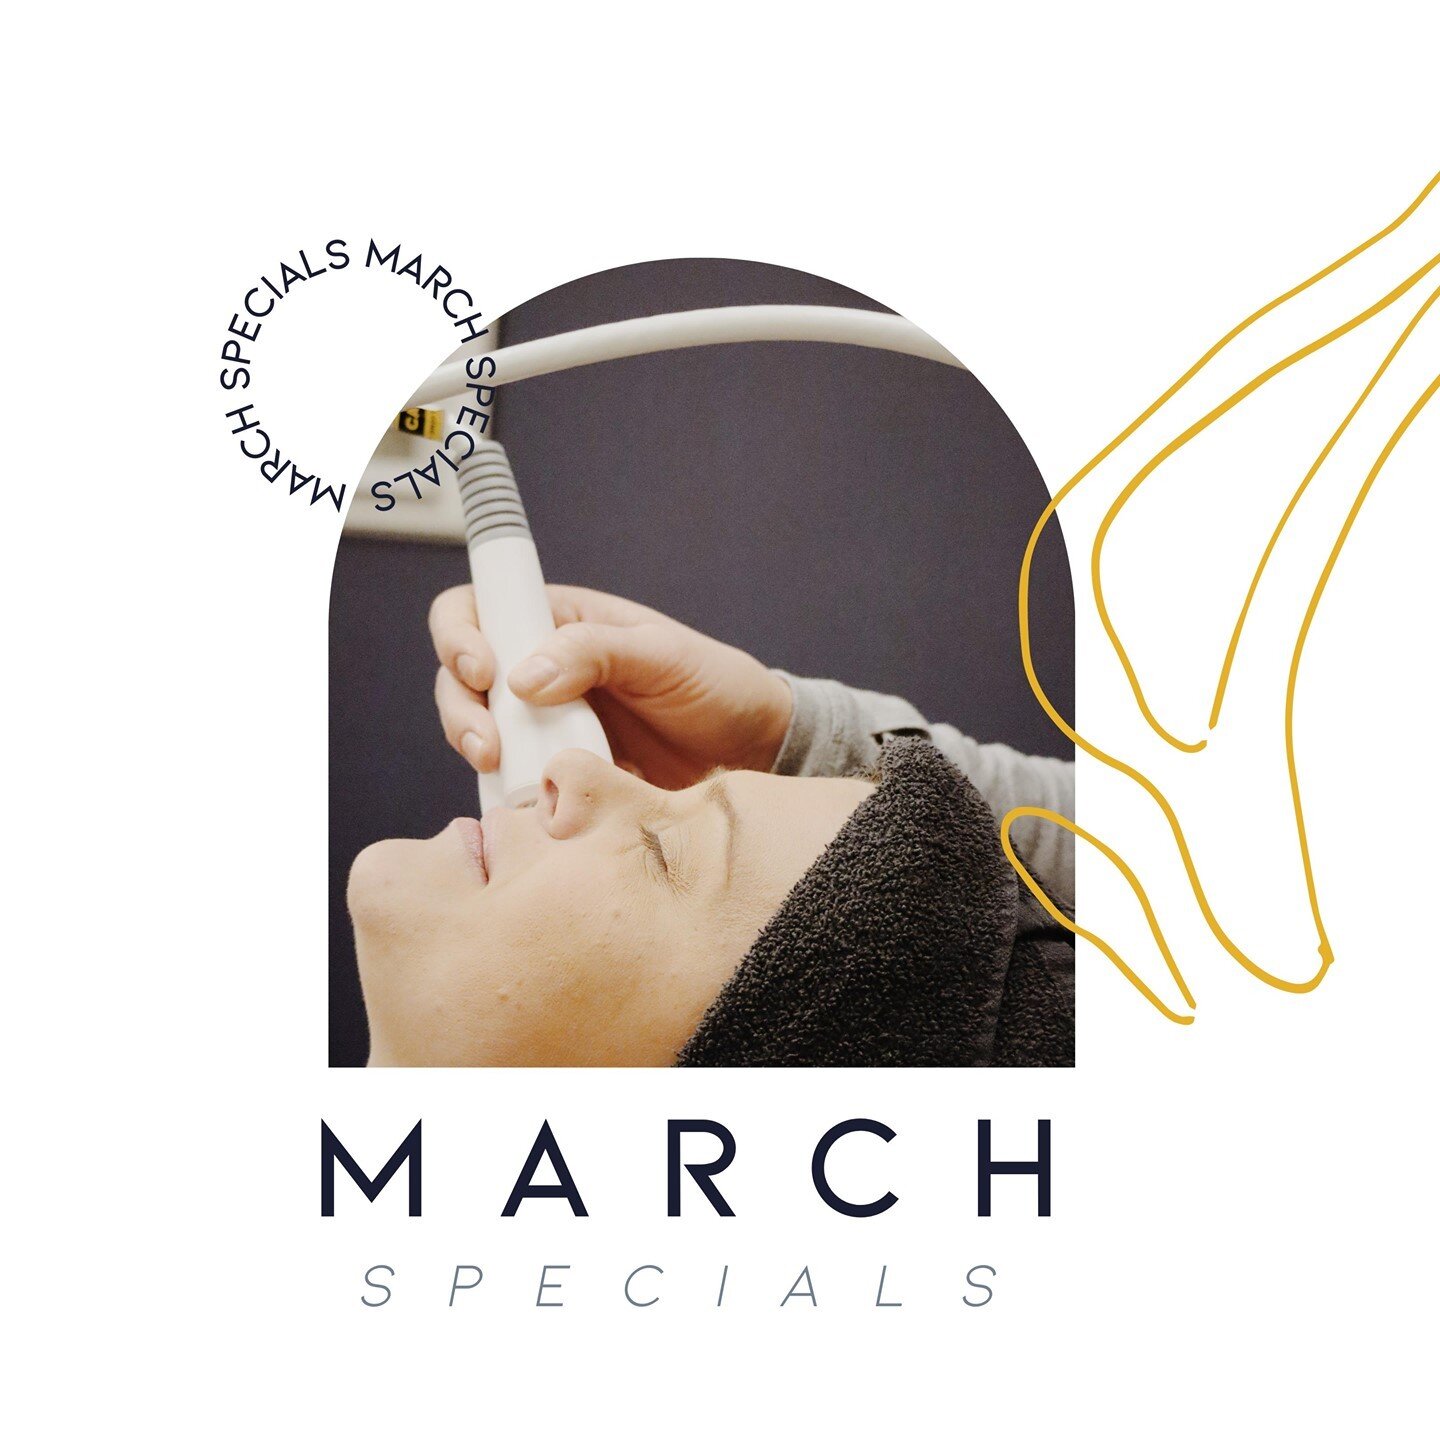 March Specials are coming in hot 🔥⁠
⁠
Get 21% off the following services:⁠
⁠
✖️3-pack of fat-melting Bliss sessions⁠
✖️10-pack of cellulite reducing Legacy sessions⁠
✖️6-pack of skin-glowing chemical peels⁠
✖️4-pack of collagen-boosting Viva facials